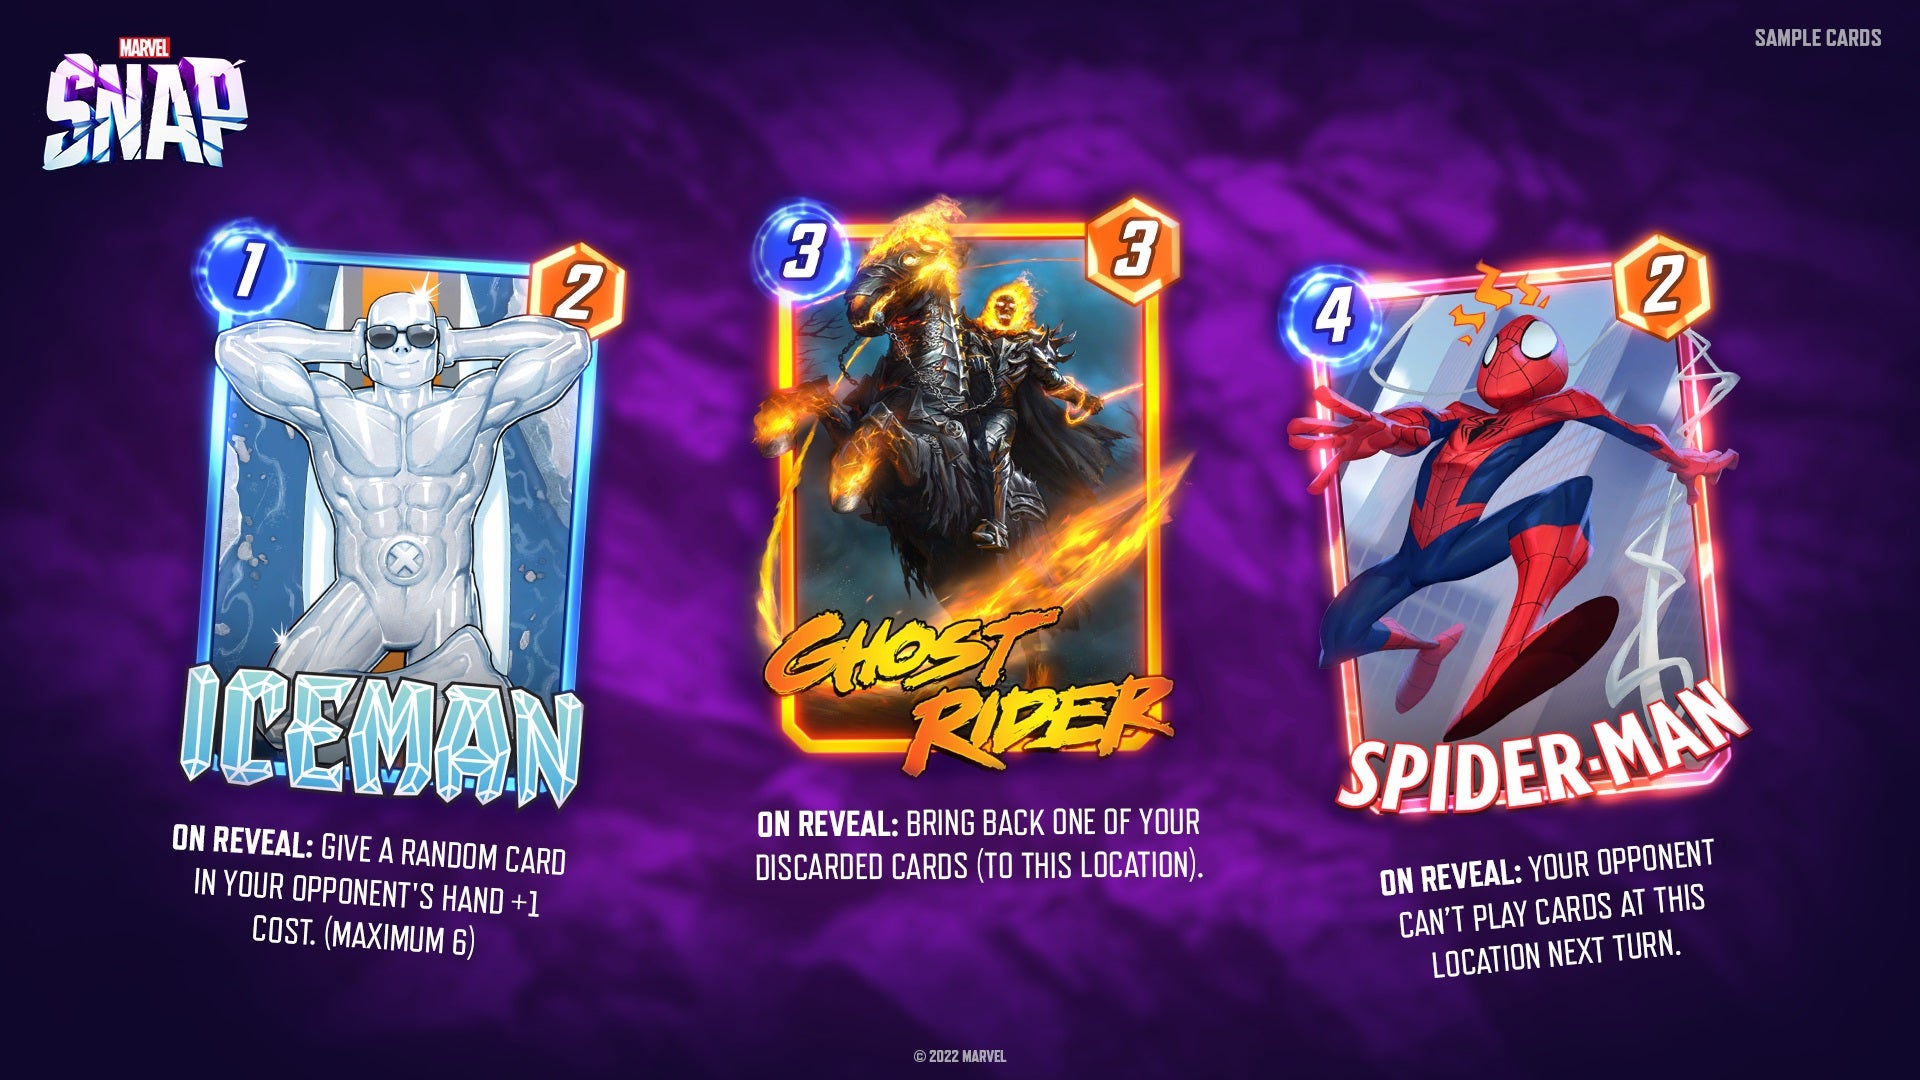 Recent gameplay showcase and card reveals for the upcoming game Marvel Snap